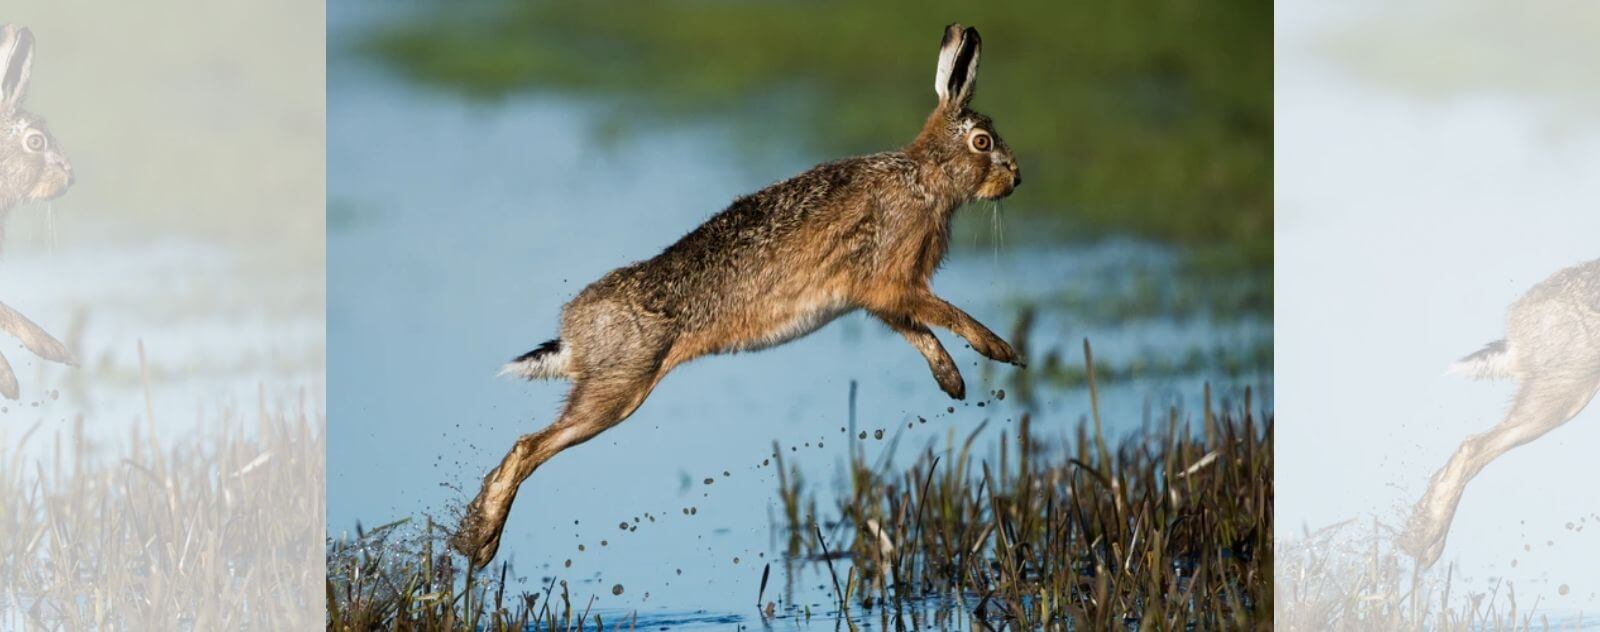 Hare or Lagomorph Jumping in Nature Next to a Pond